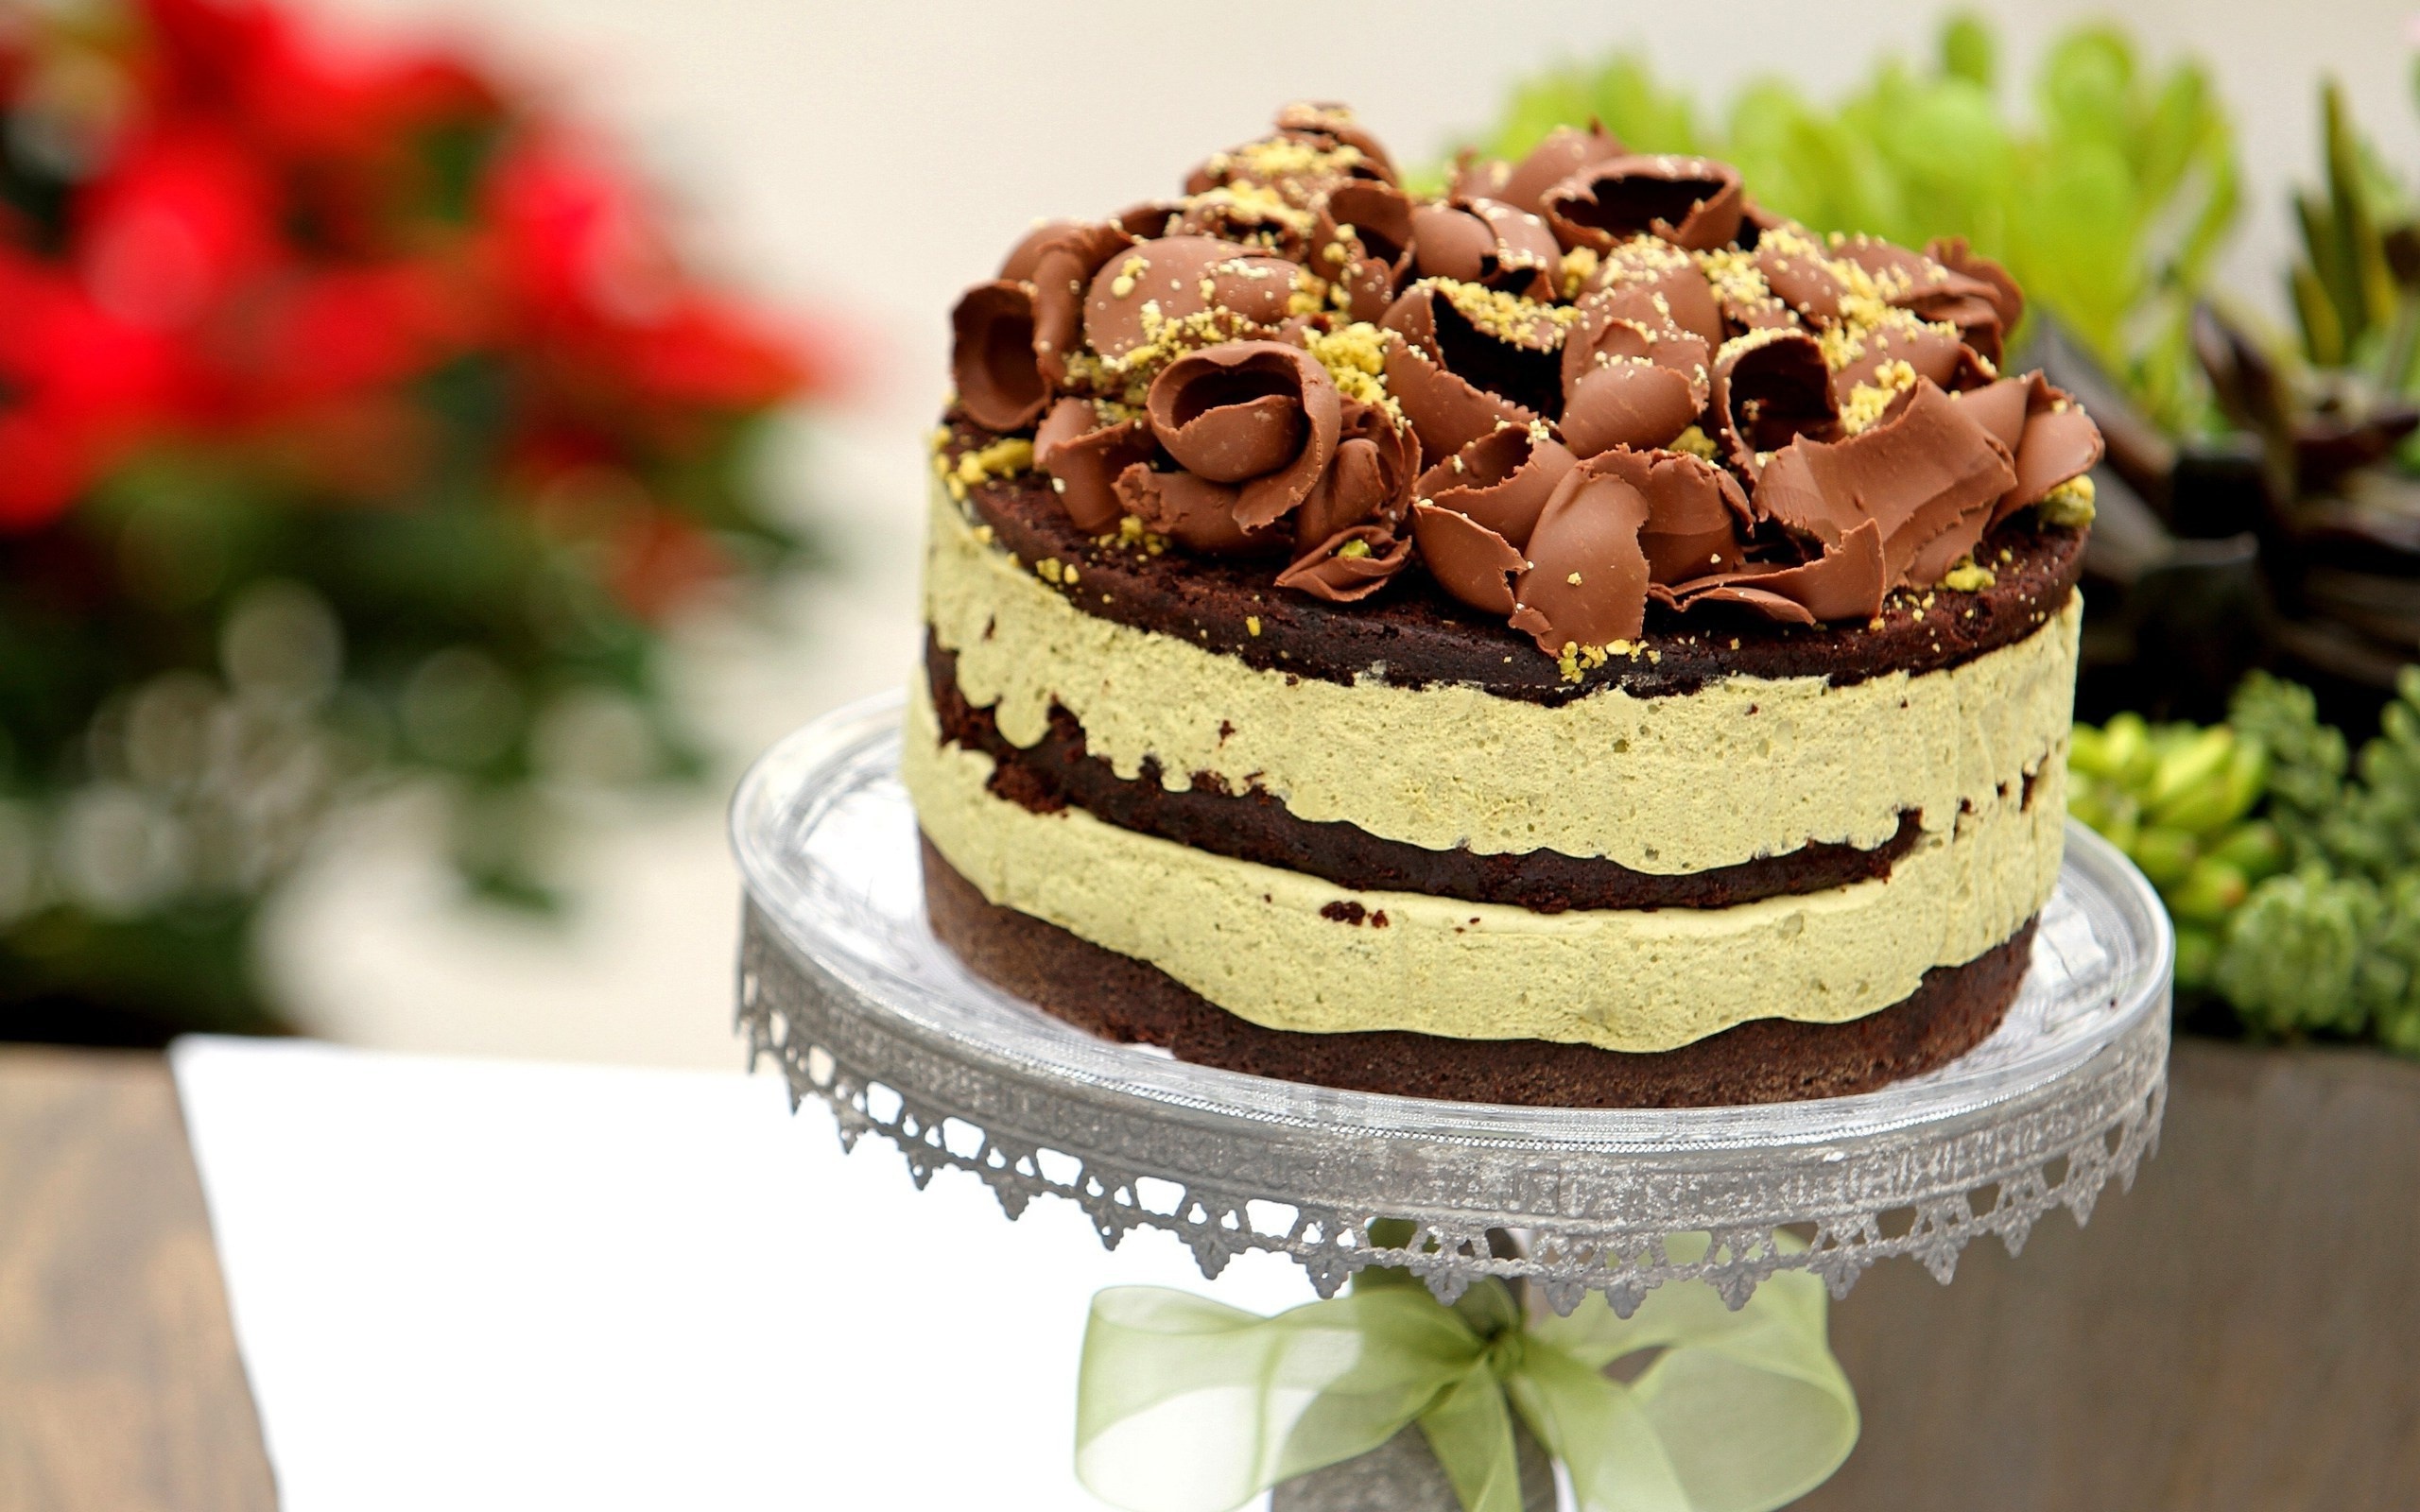 Cake: Combines layers of chocolate with cherries and whipped cream. 2560x1600 HD Background.